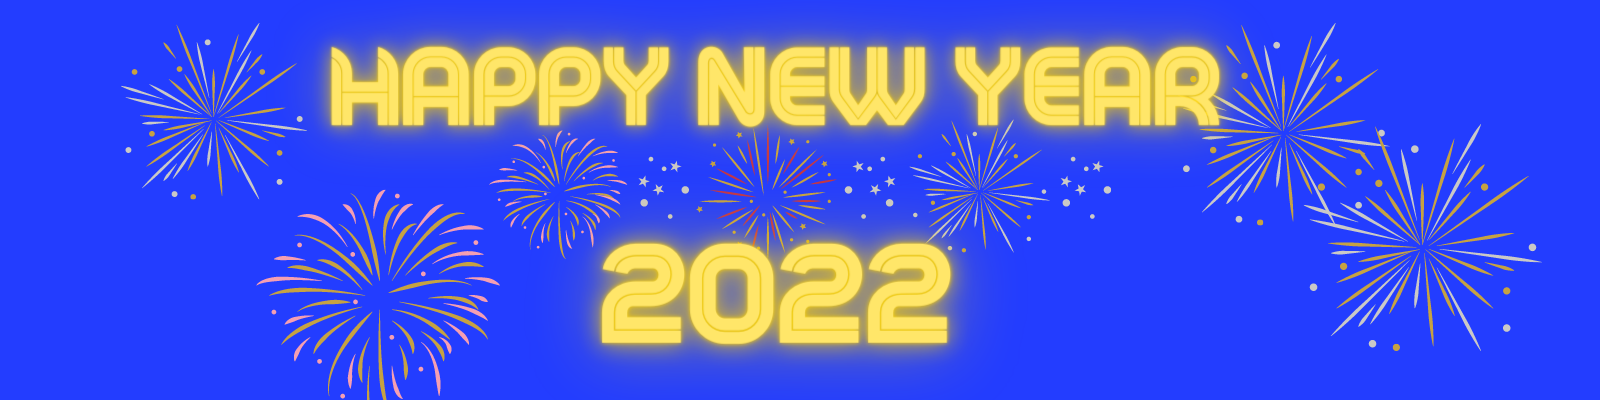 Happy%20New%20Year%202022.png